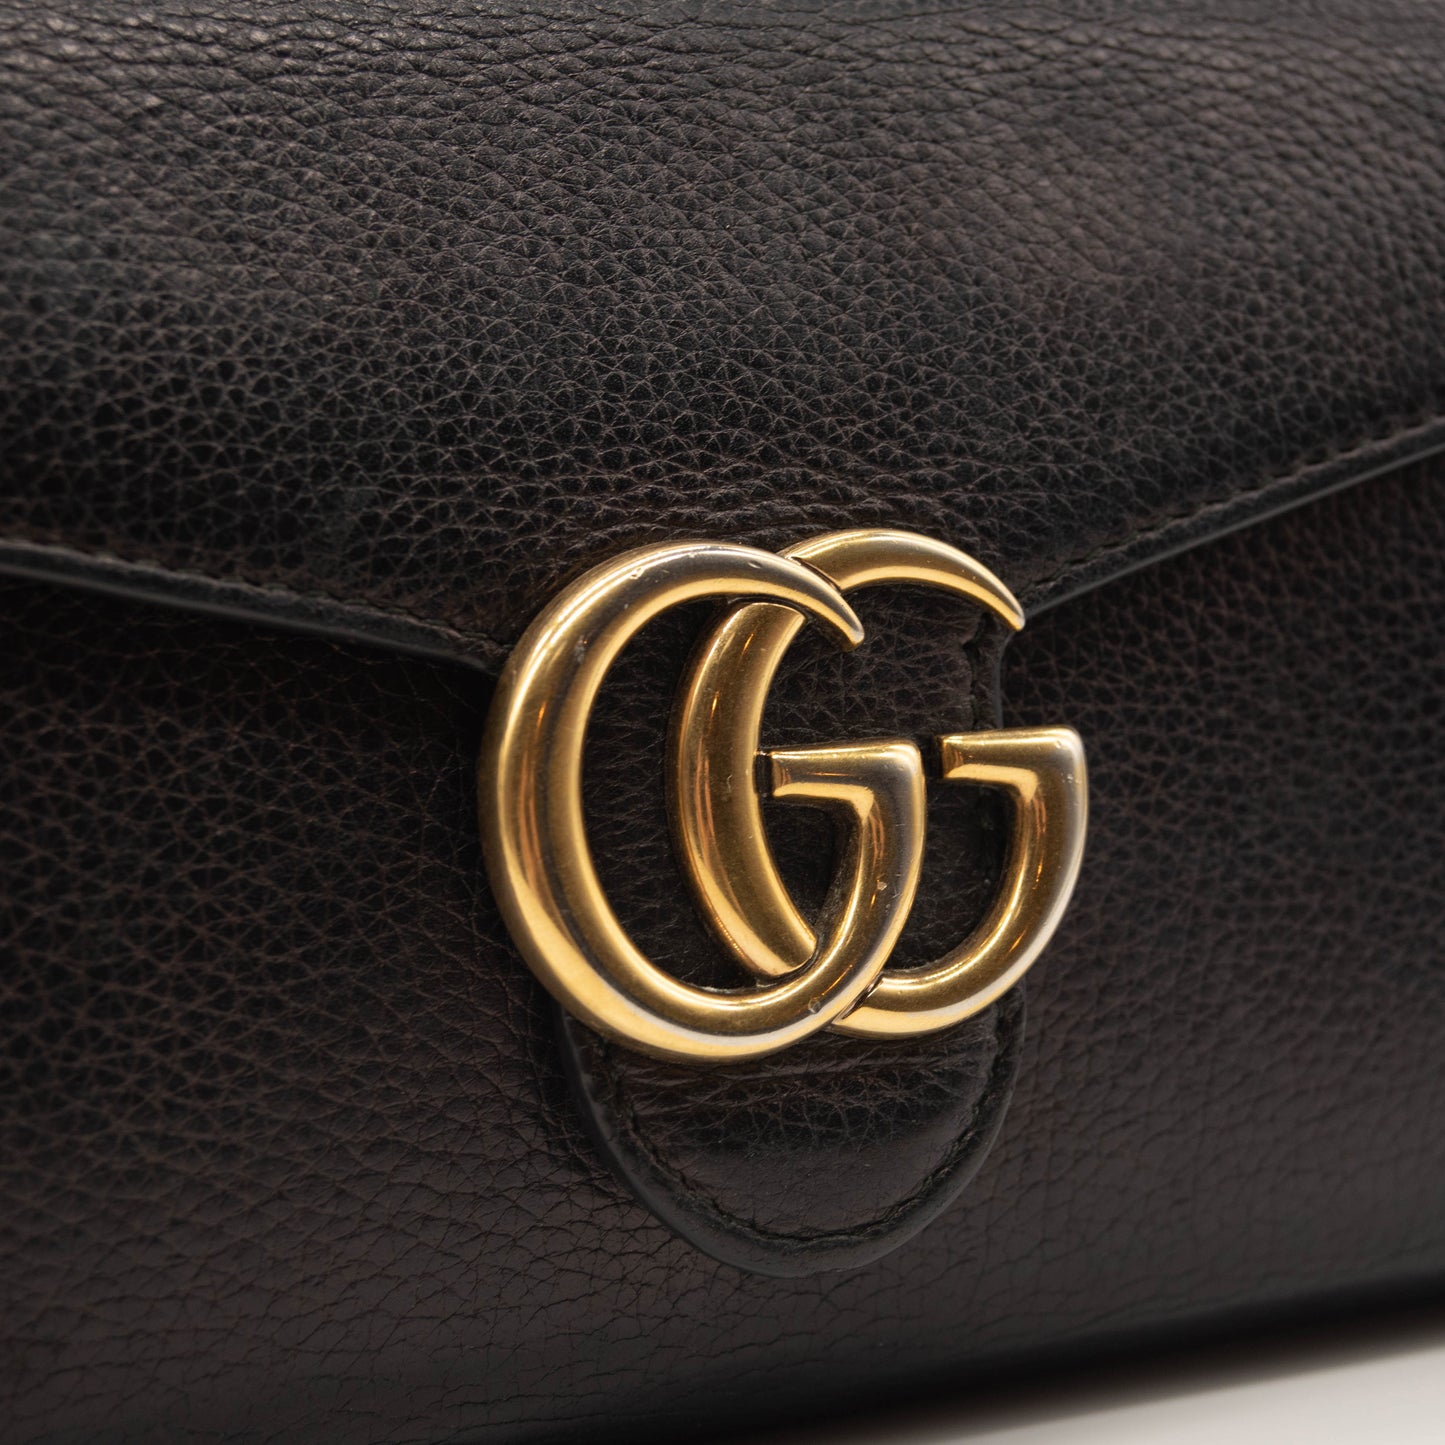 Gucci Marmont Chain Wallet Black Leather Shoulder Bag WOC GG Crossbody